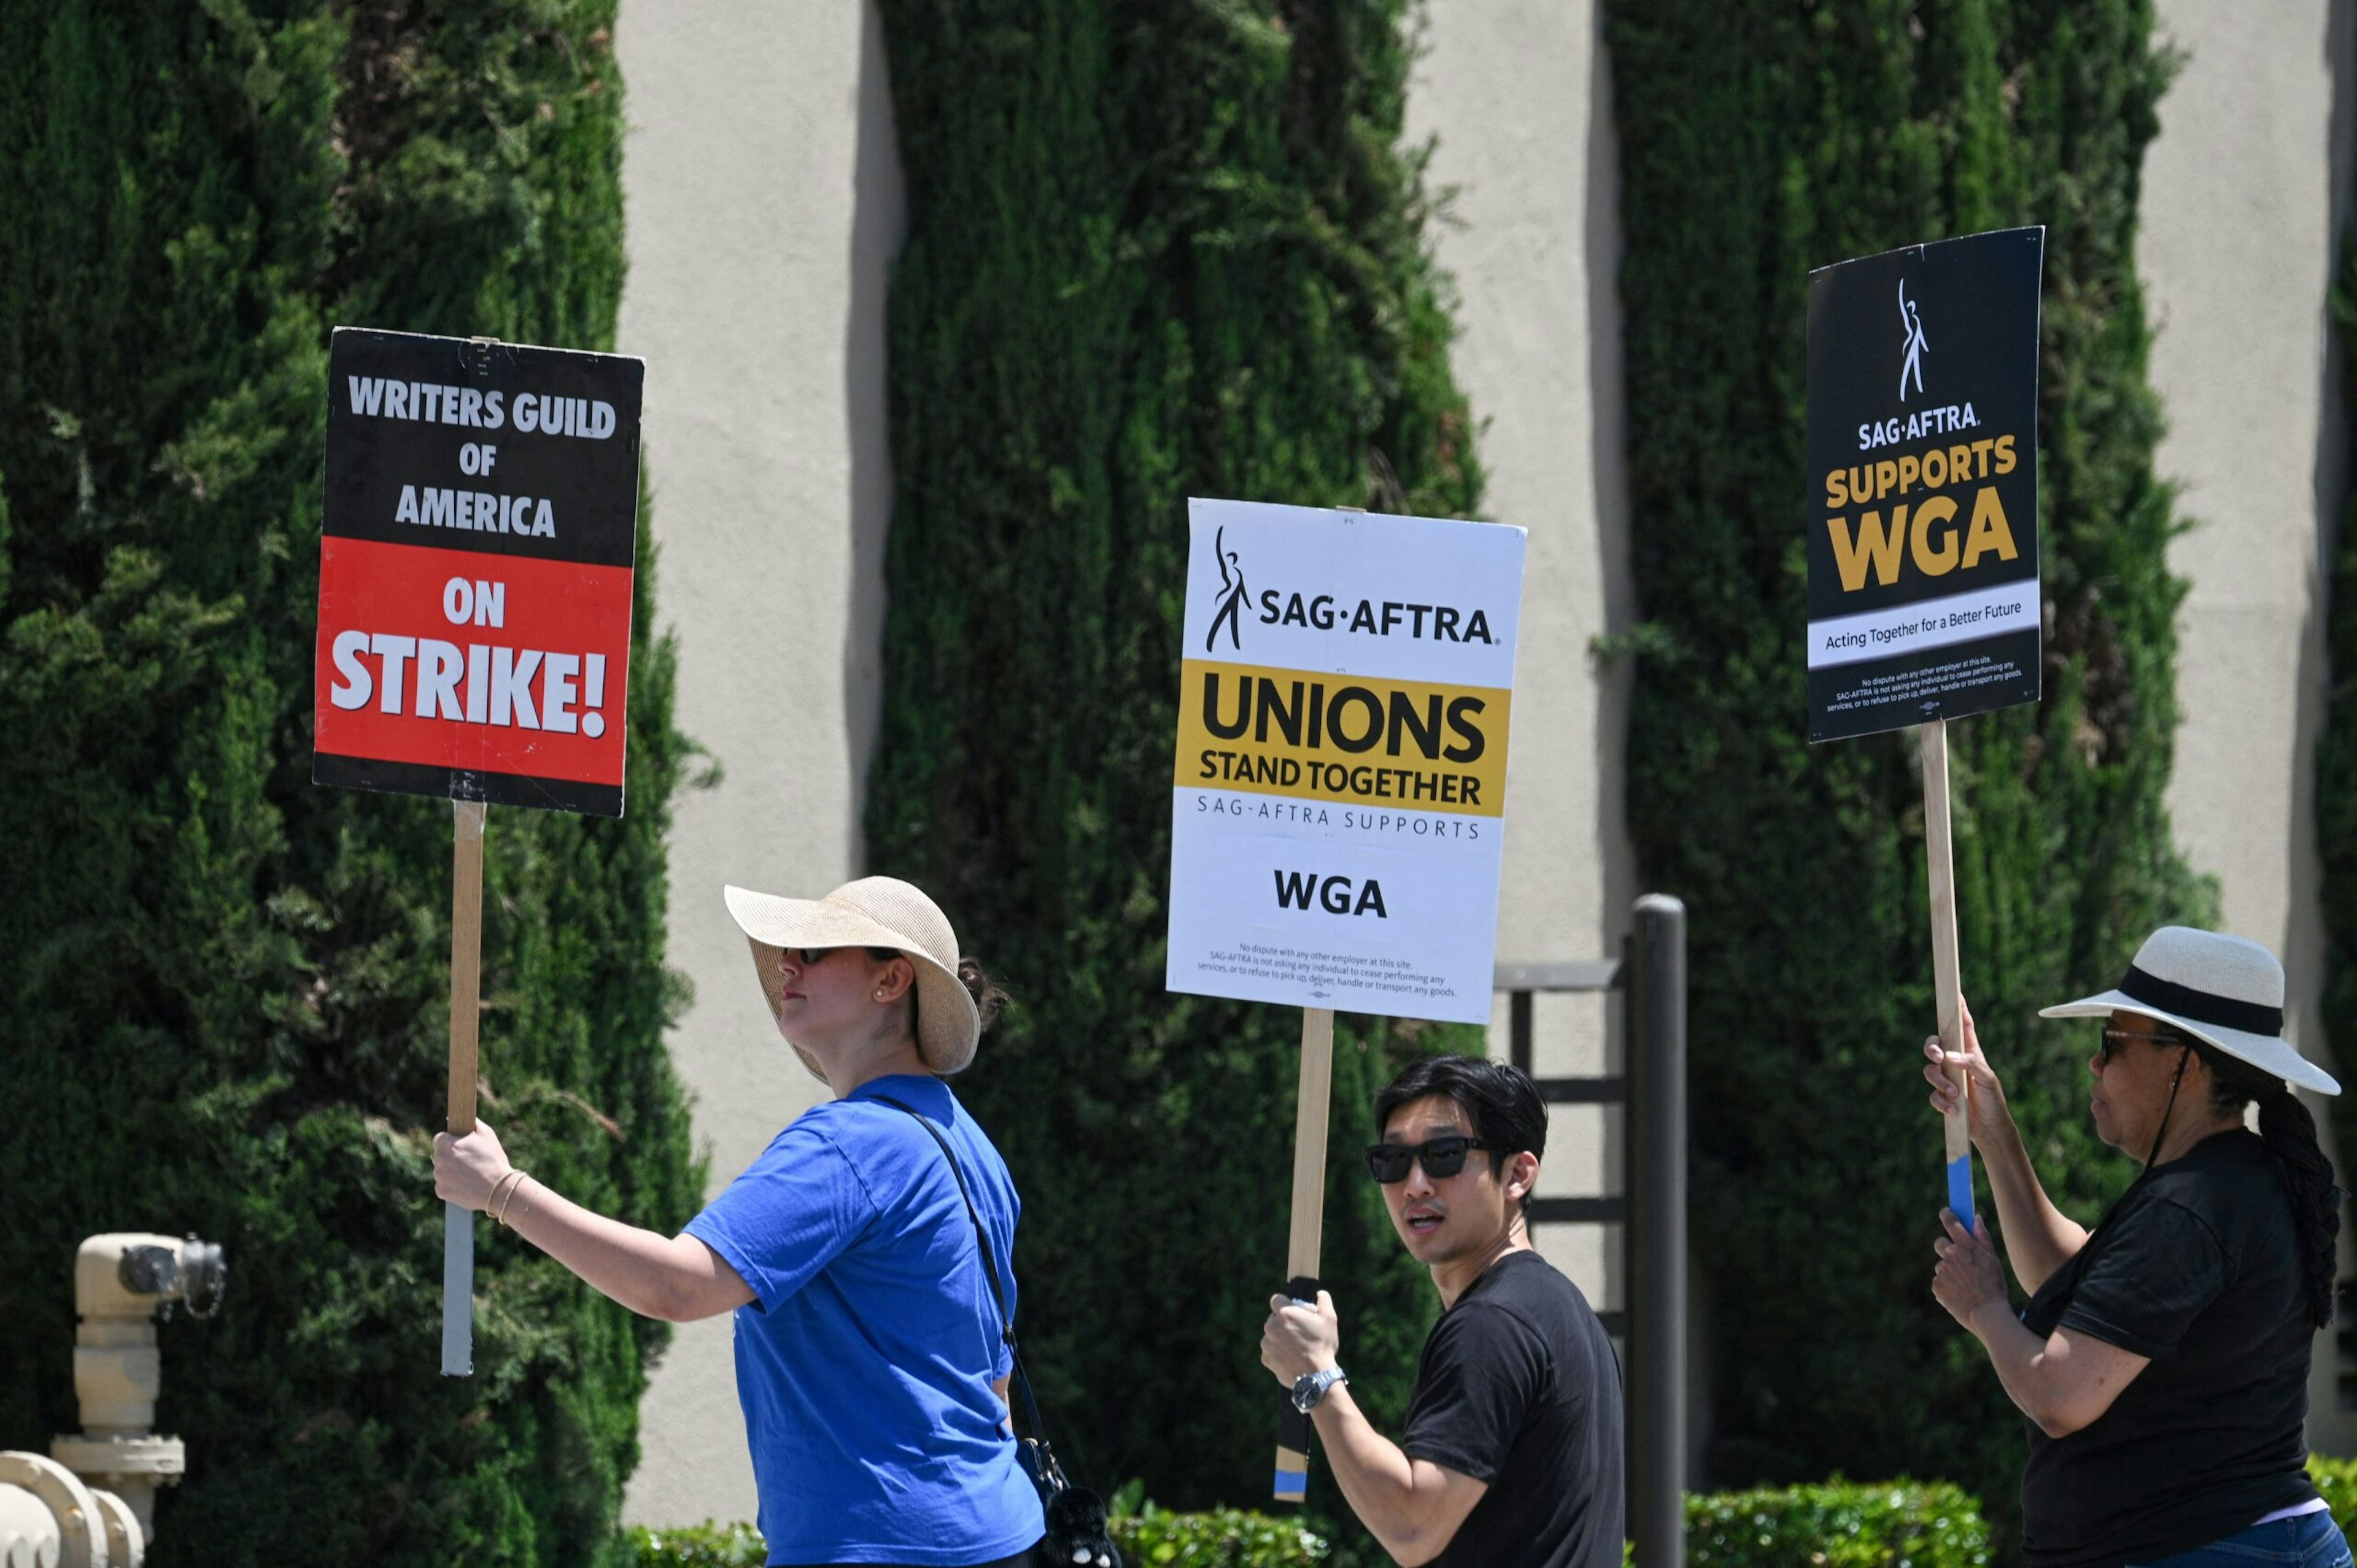 Hollywood writers and their supporters from the SAG AFTRA actors' union walk the picket line outside Warner Bros Studios in Burbank, California, June 30, 2023. Hollywood's summer of discontent could dramatically escalate this weekend, with actors ready to join writers in a massive "double strike" that would bring nearly all US film and television productions to a halt. The Screen Actors Guild (SAG-AFTRA) is locked in last-minute negotiations with the likes of Netflix and Disney, with the deadline fast approaching at midnight Friday (0700 GMT Saturday). (Photo by Robyn Beck / AFP) (Photo by ROBYN BECK/AFP via Getty Images)